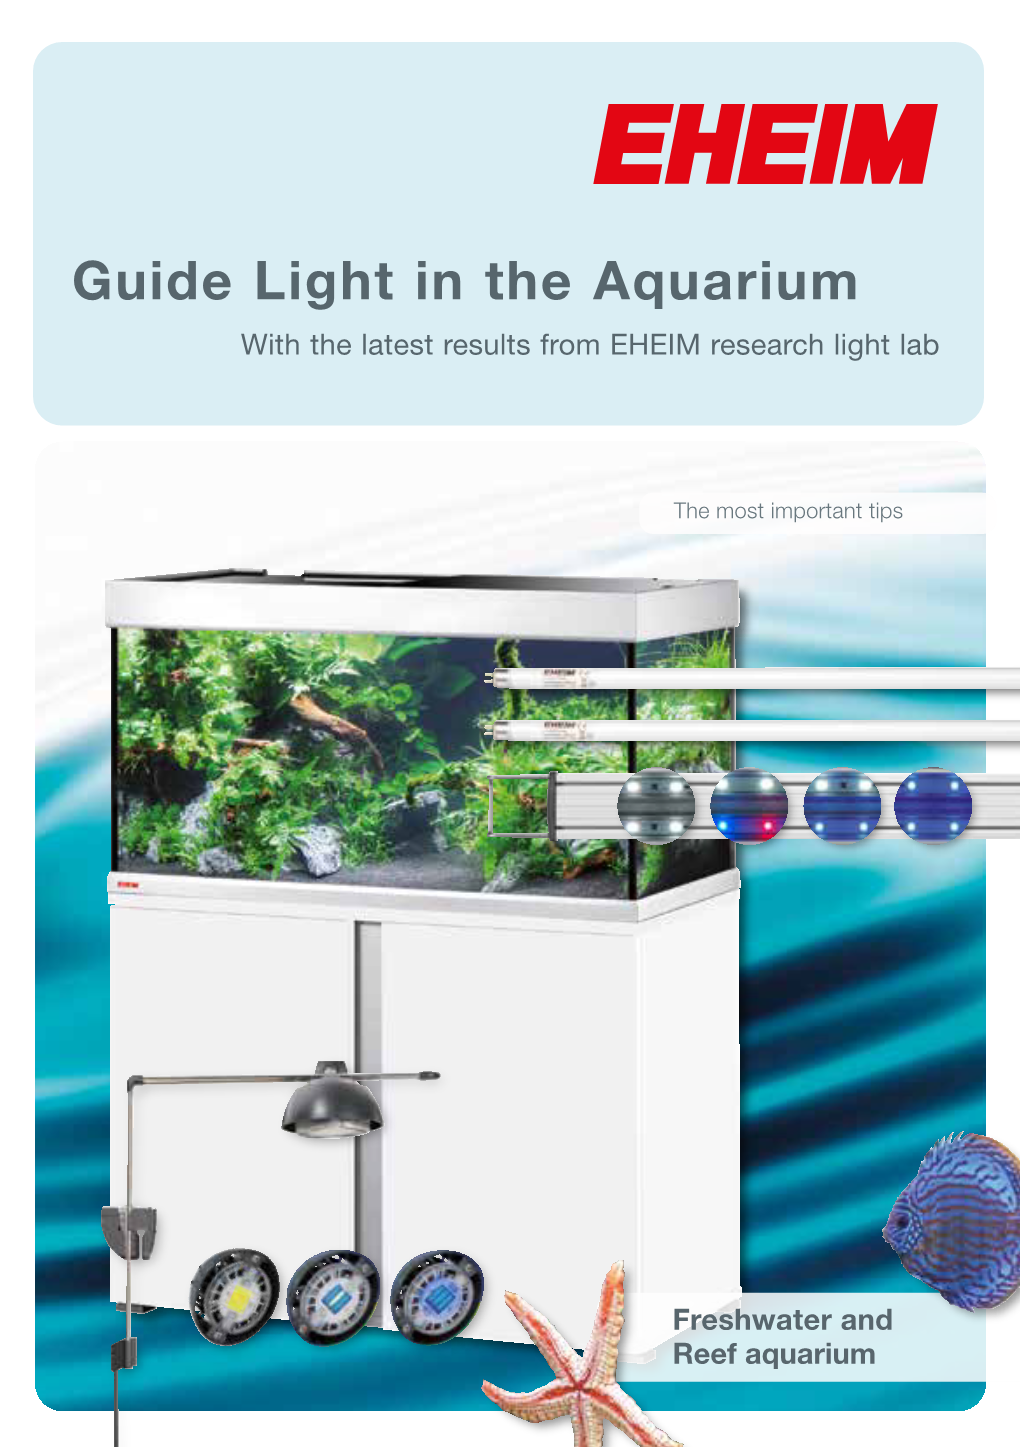 Guide Light in the Aquarium with the Latest Results from EHEIM Research Light Lab